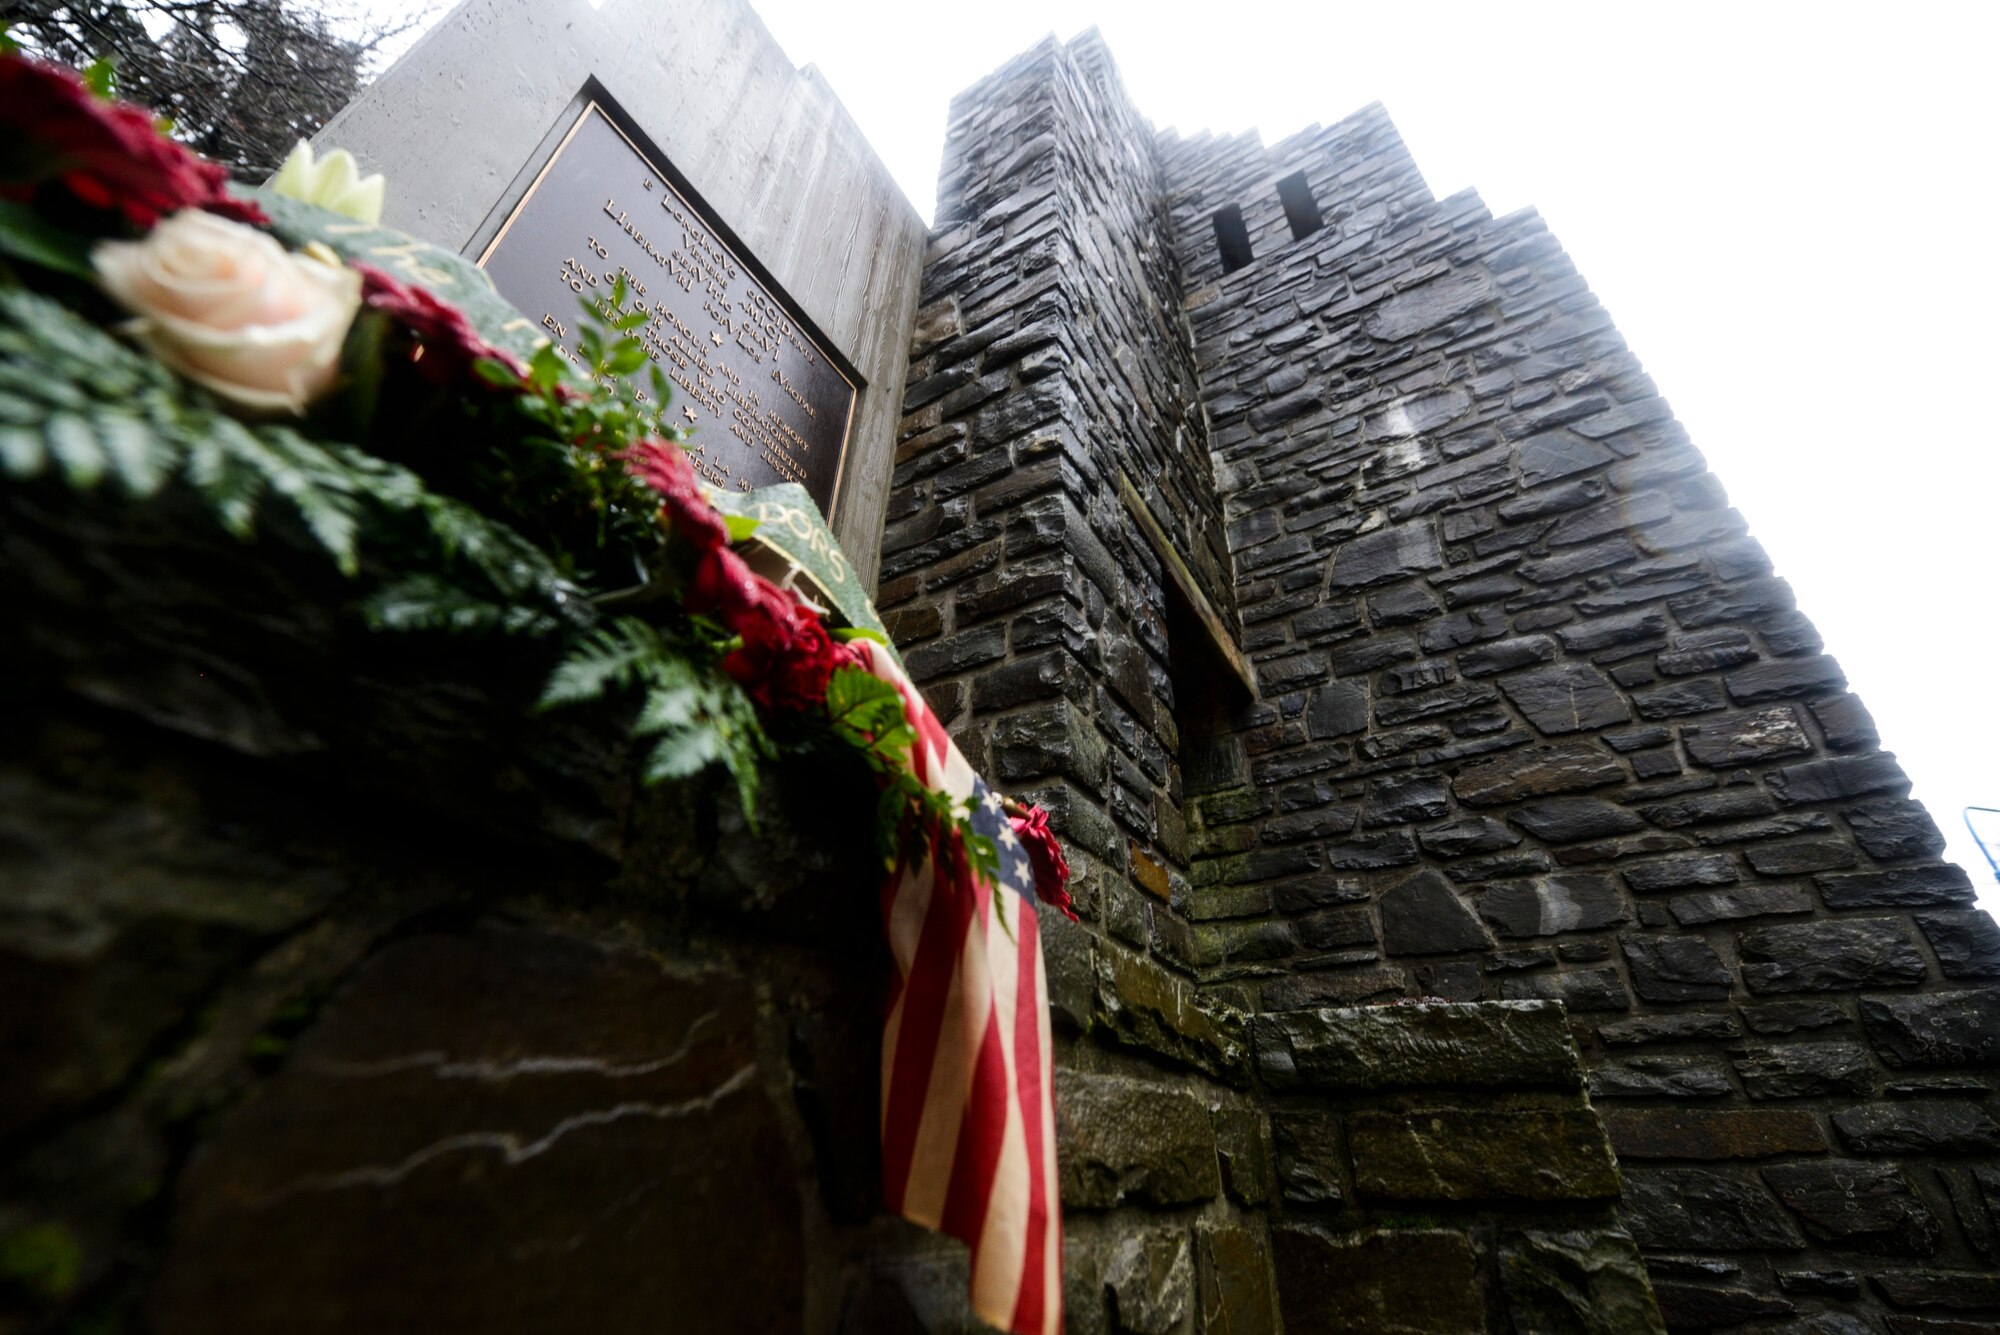 A wreath rests on the National Liberation Memorial at Schumanns Eck, Luxembourg, Dec. 16, 2015.  The plaque on the memorial reads ‘To the honor and in memory of our allied liberators and all those who contributed to restore liberty and justice.’ (U.S. Air Force photo by Staff Sgt. Christopher Ruano/Released)